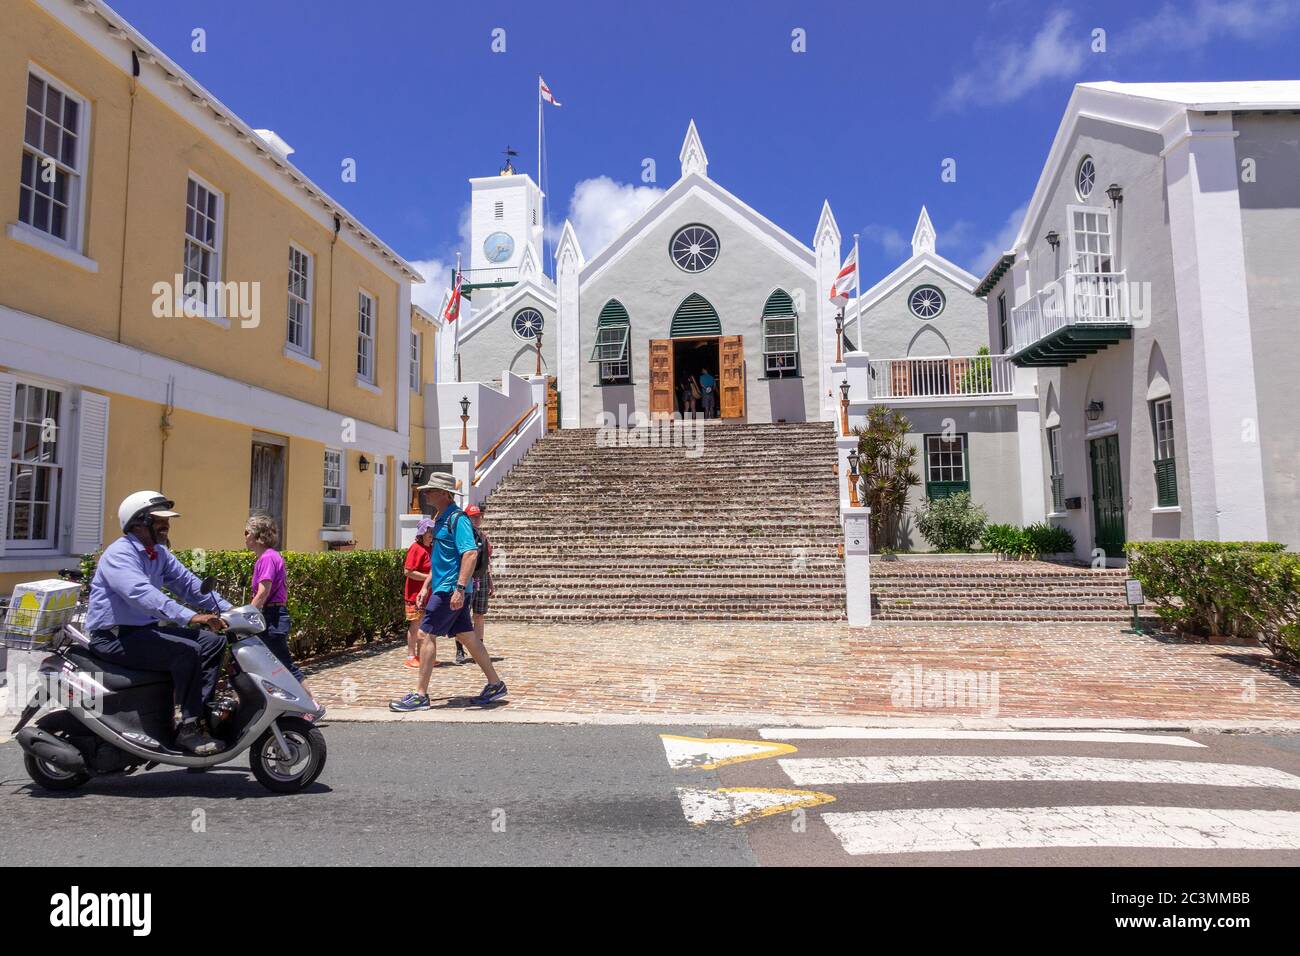 Their Majesties Chappell St. Peter's Anglican Church In The Historic Town Of St. George's Bermuda Stock Photo